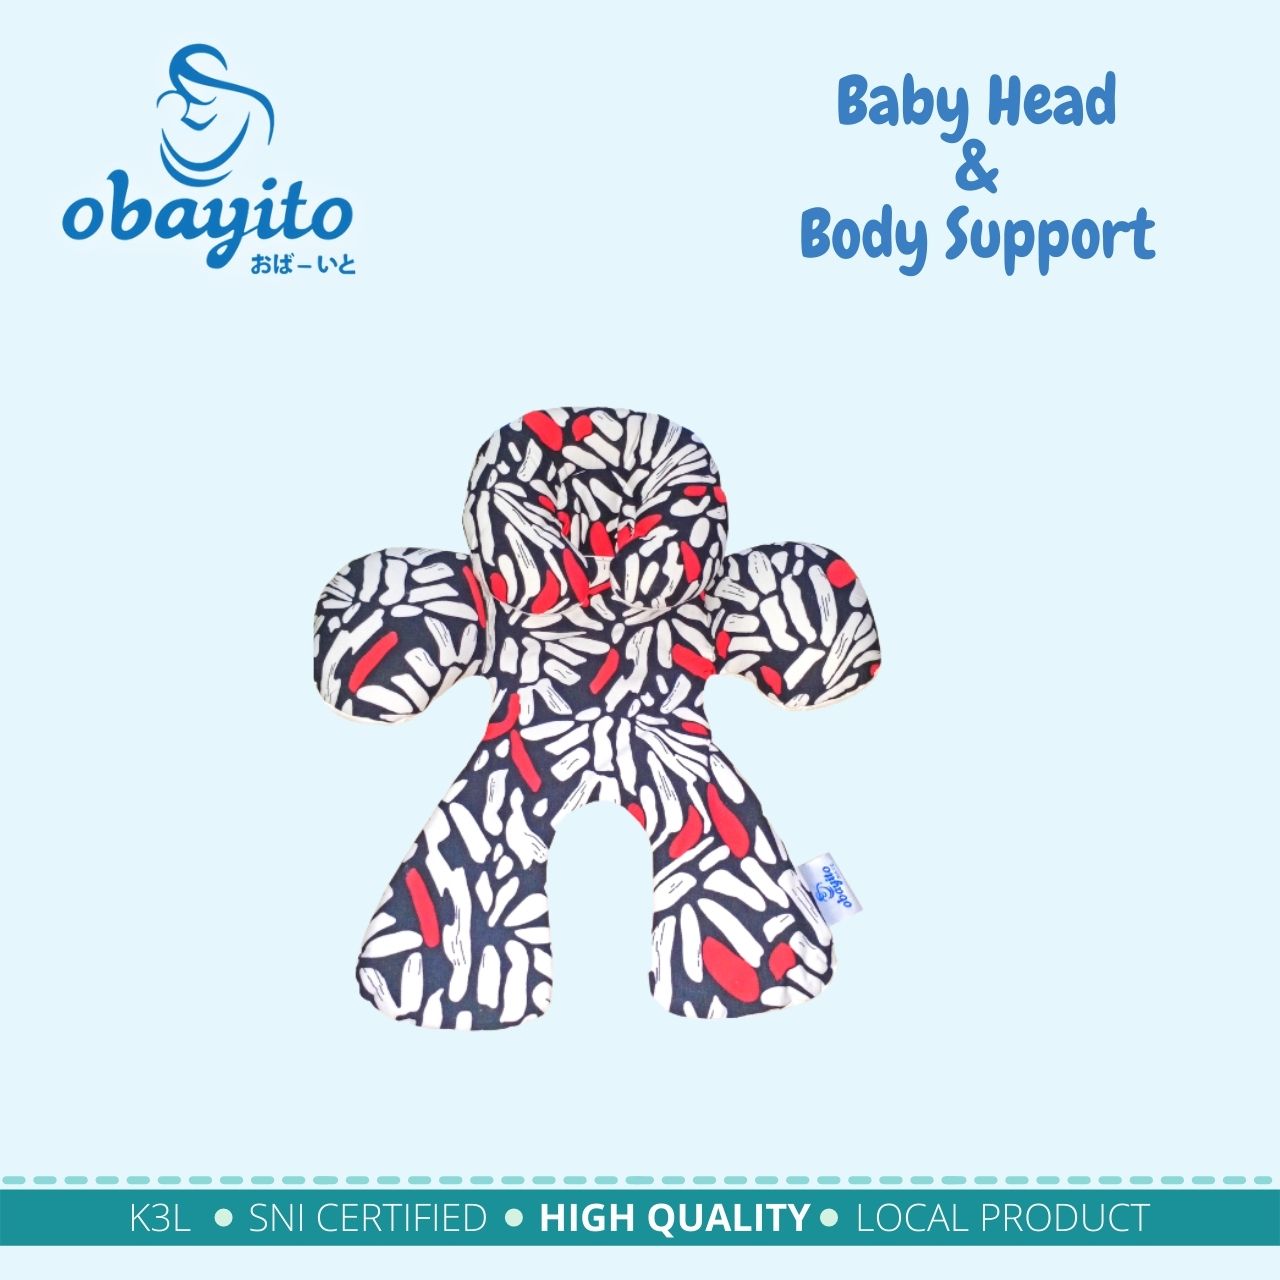 Baby head & body support